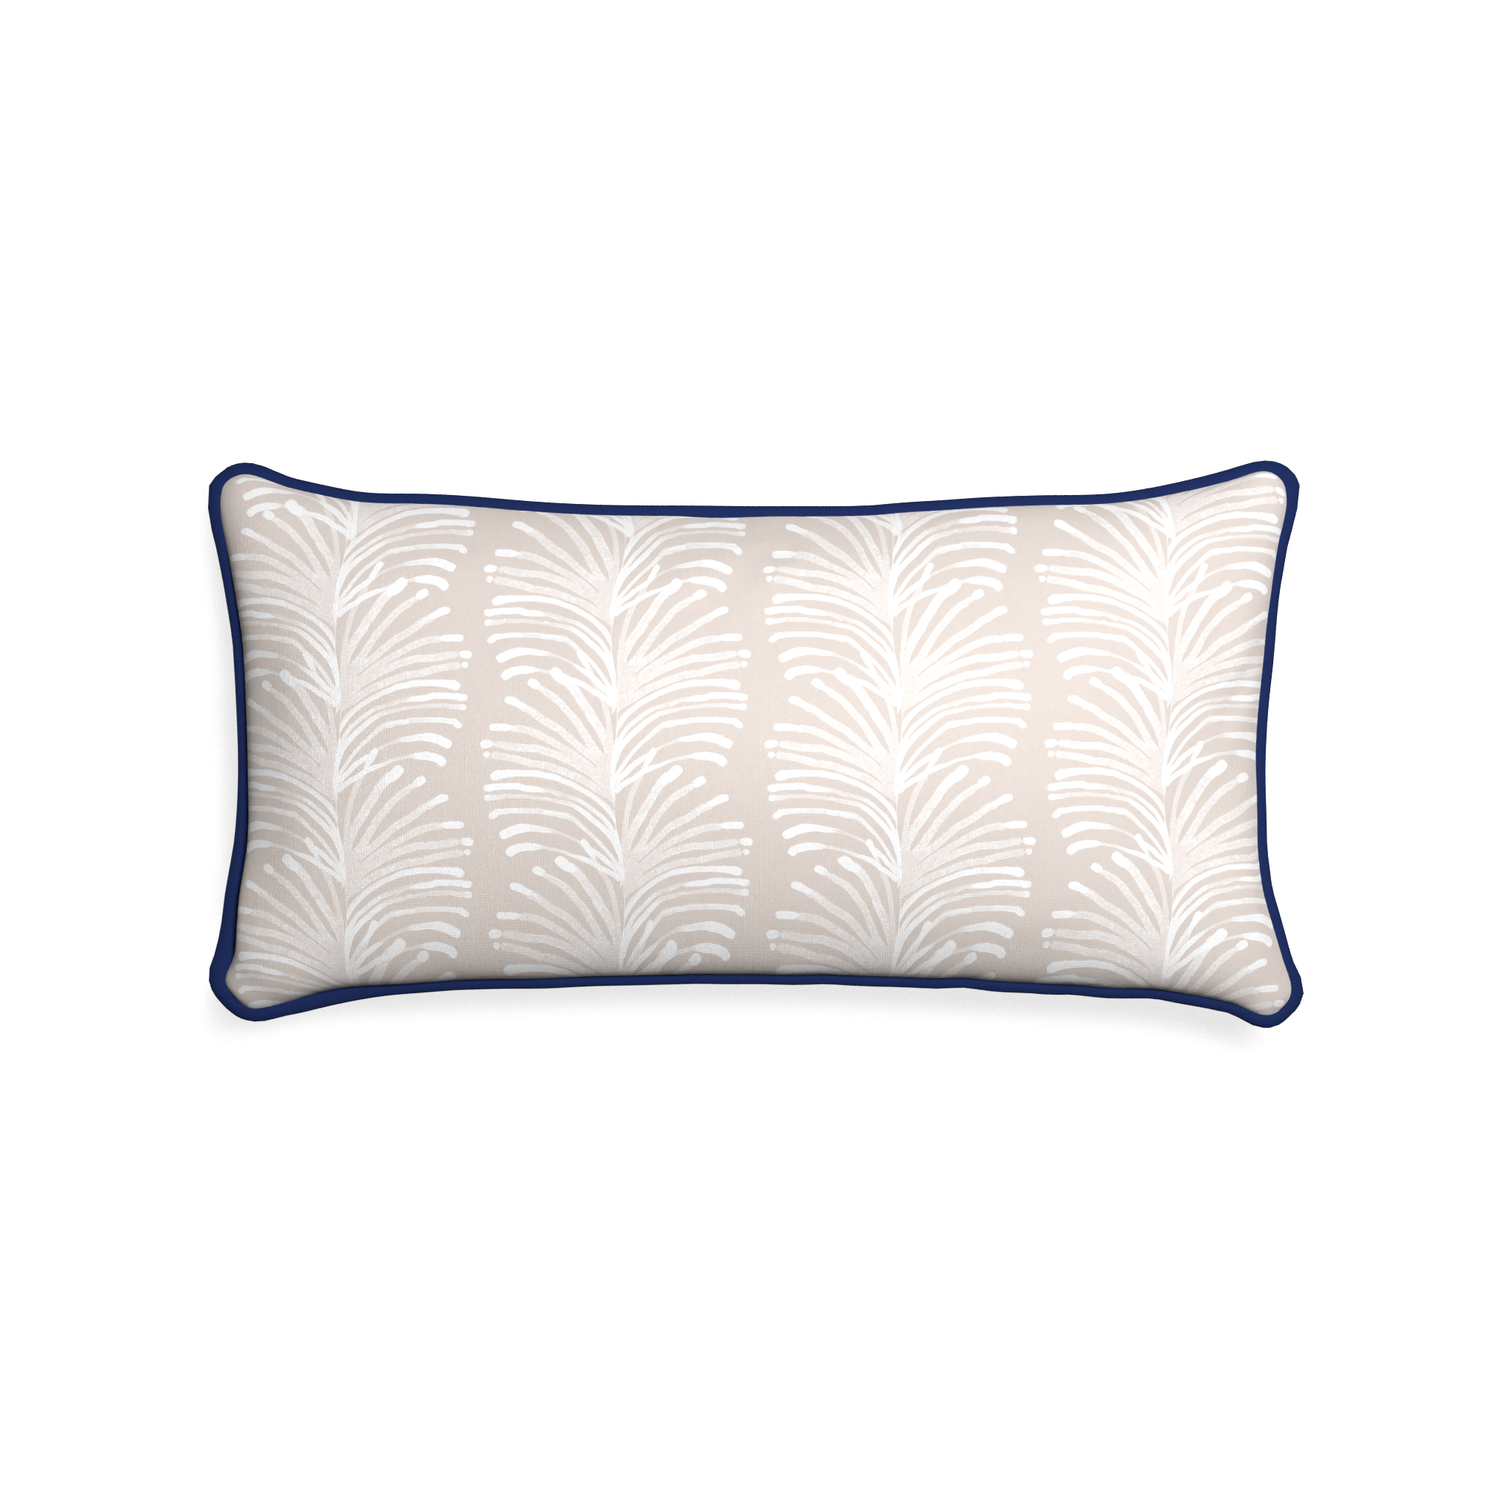 Midi-lumbar emma sand custom sand colored botanical stripepillow with midnight piping on white background